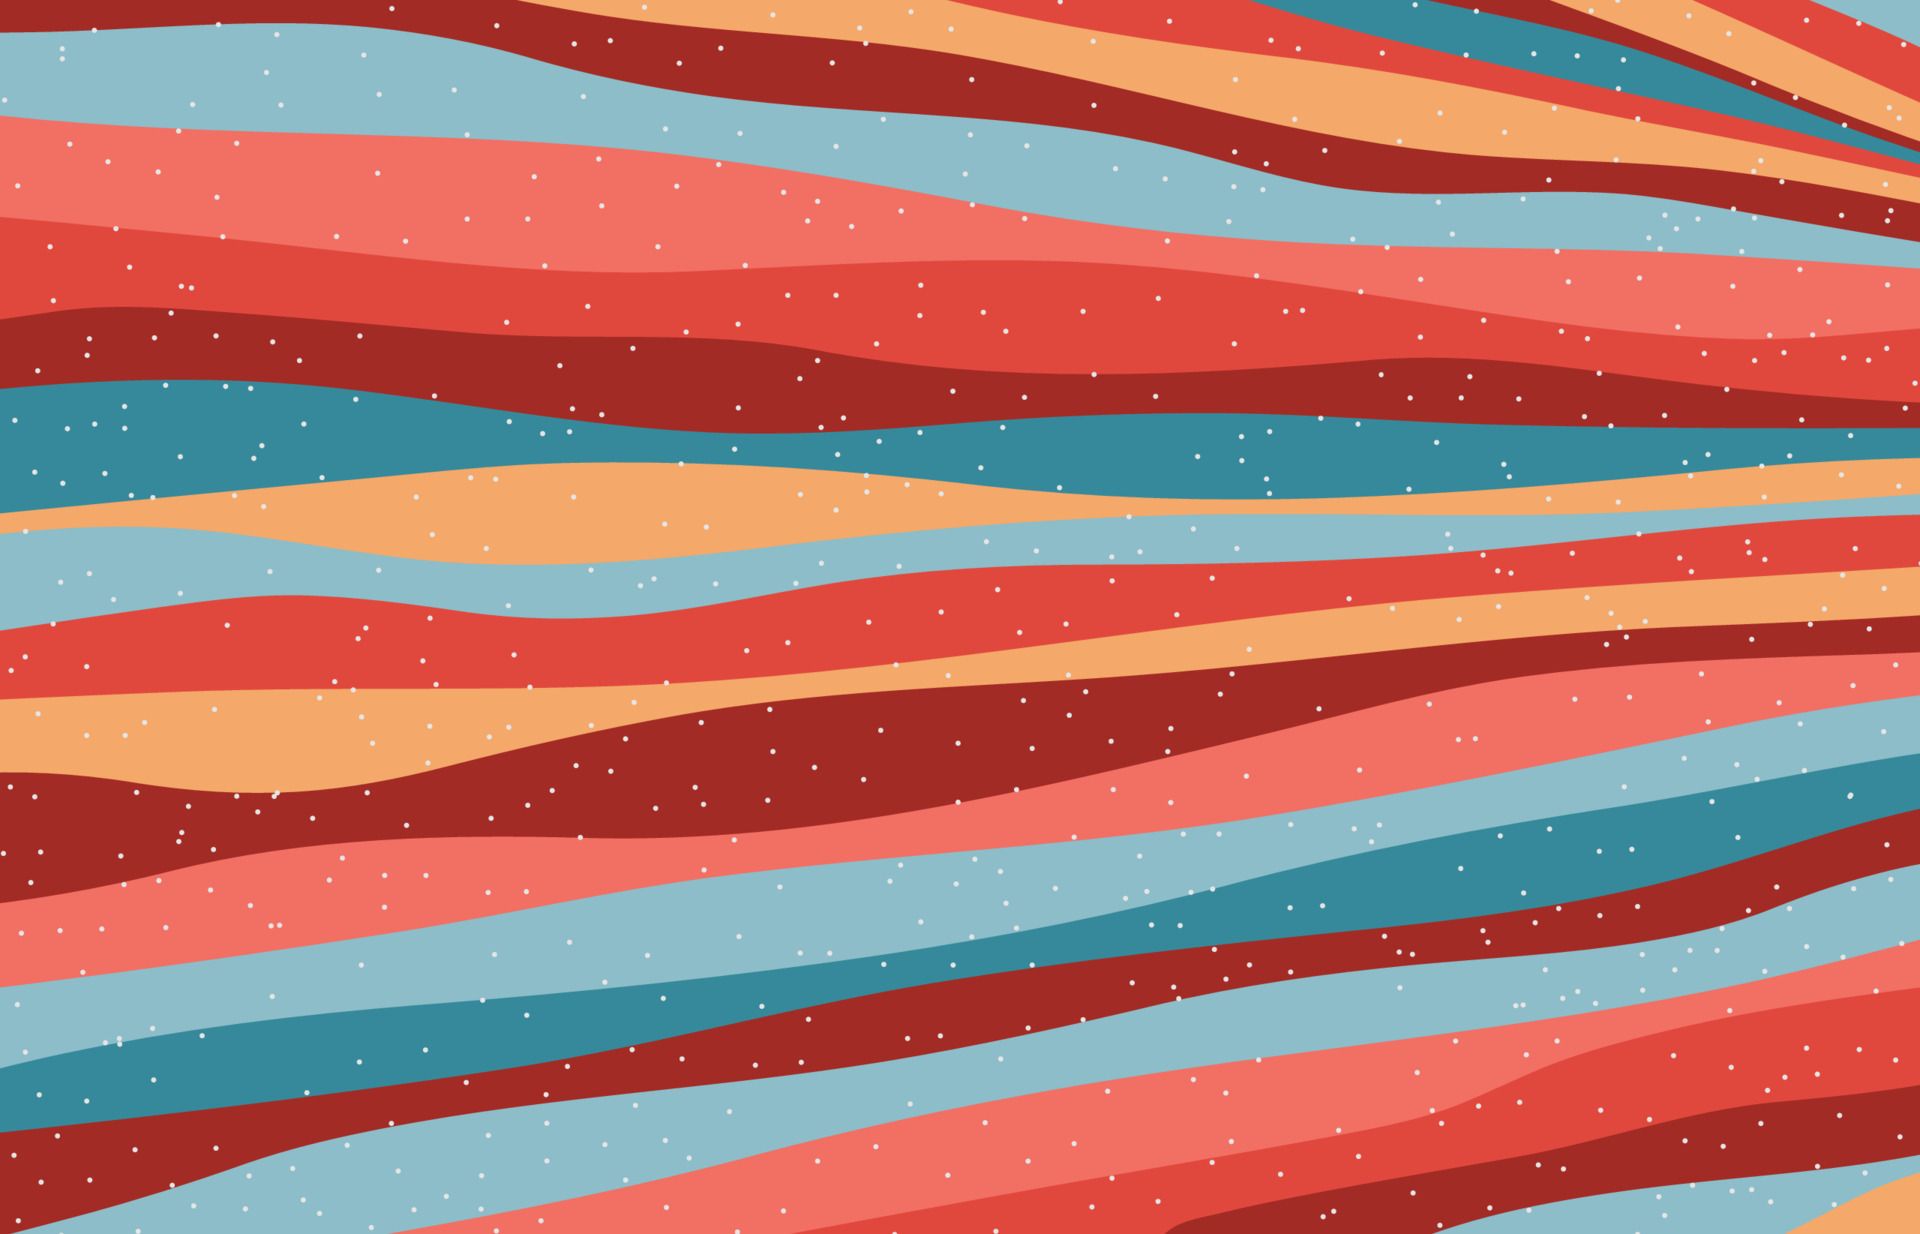 A colorful abstract wallpaper with red, orange, blue, and yellow stripes - Coral